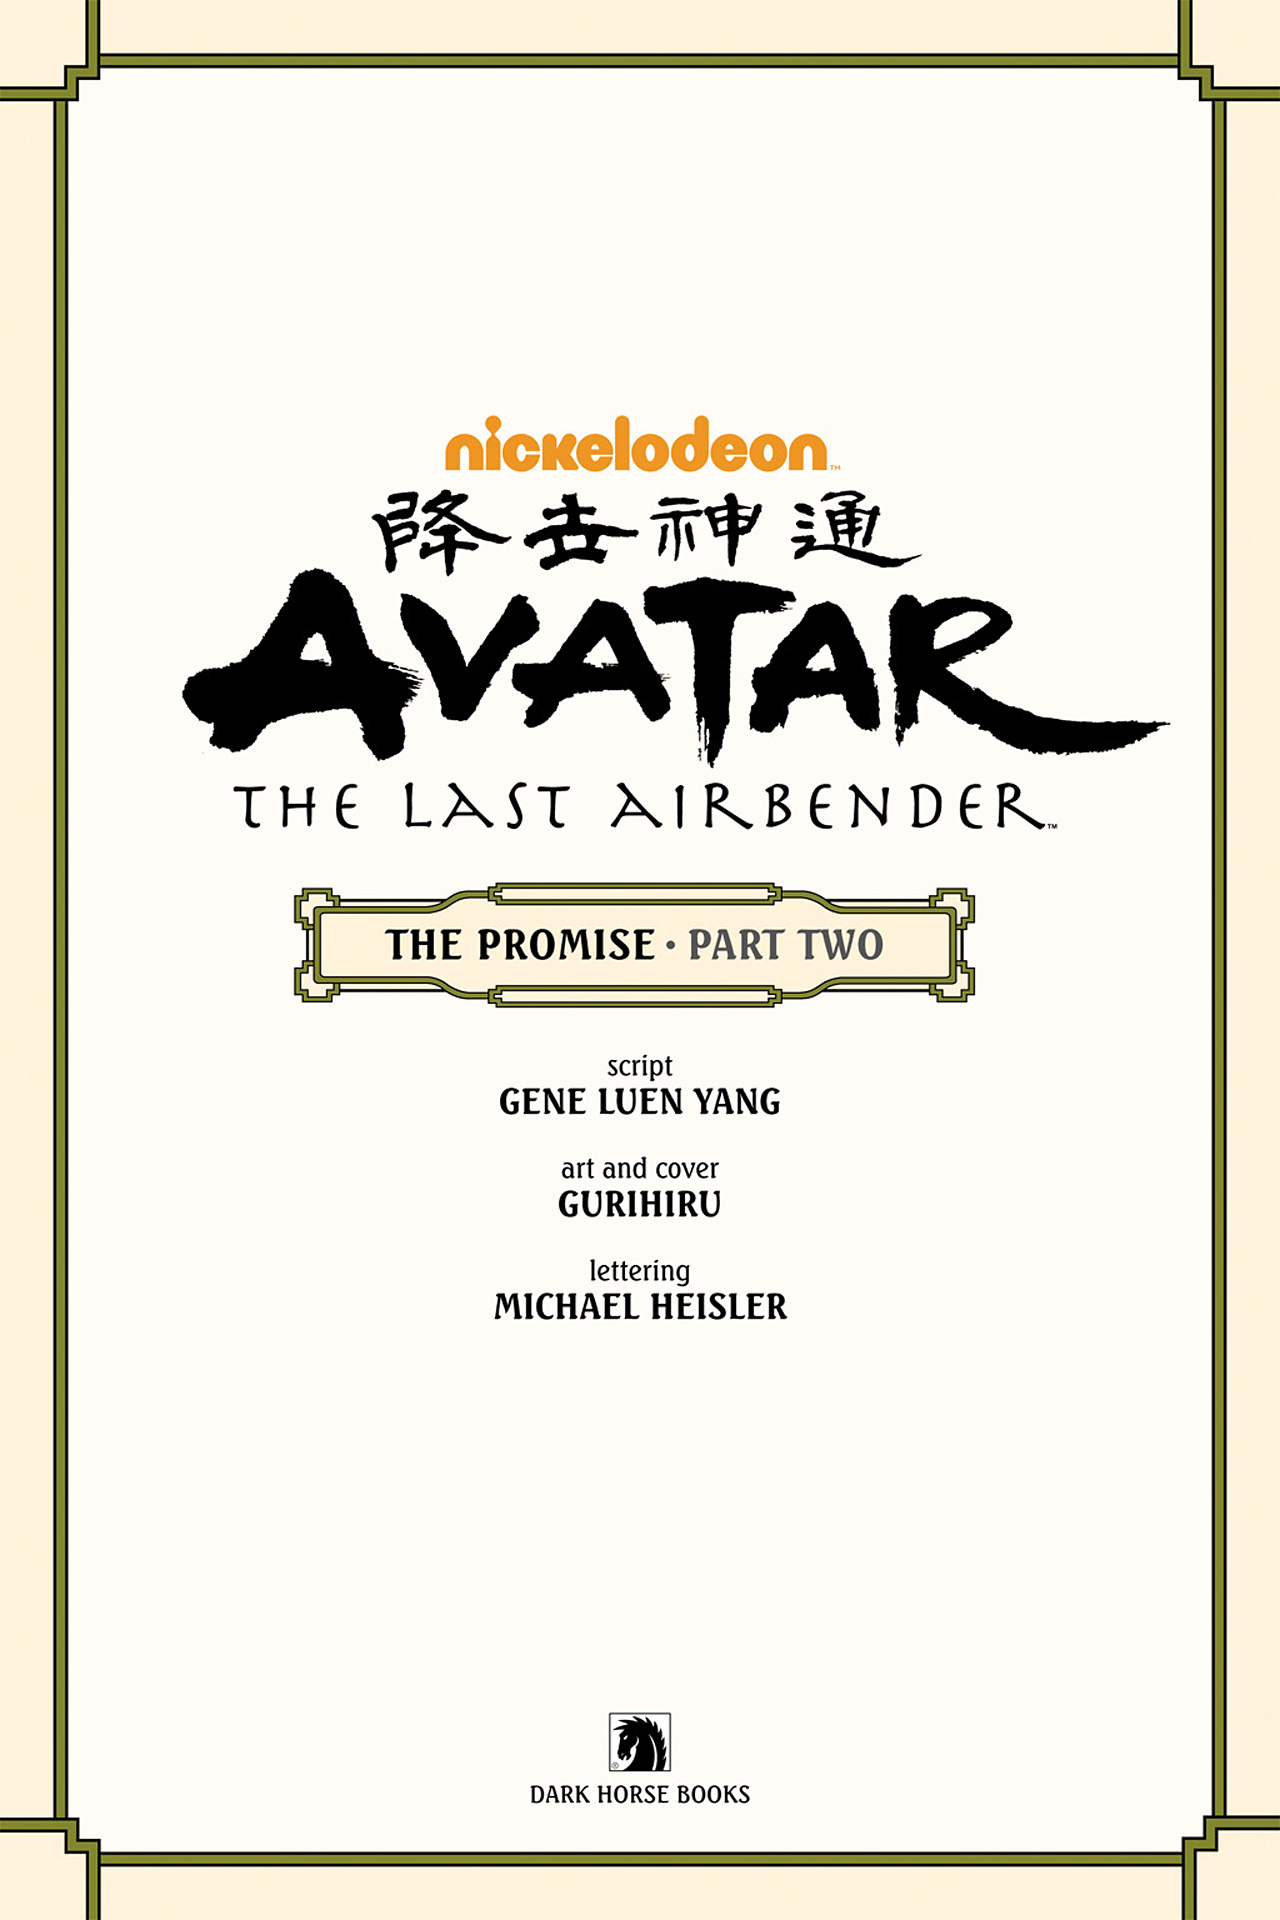 Read online Nickelodeon Avatar: The Last Airbender - The Promise comic -  Issue # Part 2 - 4